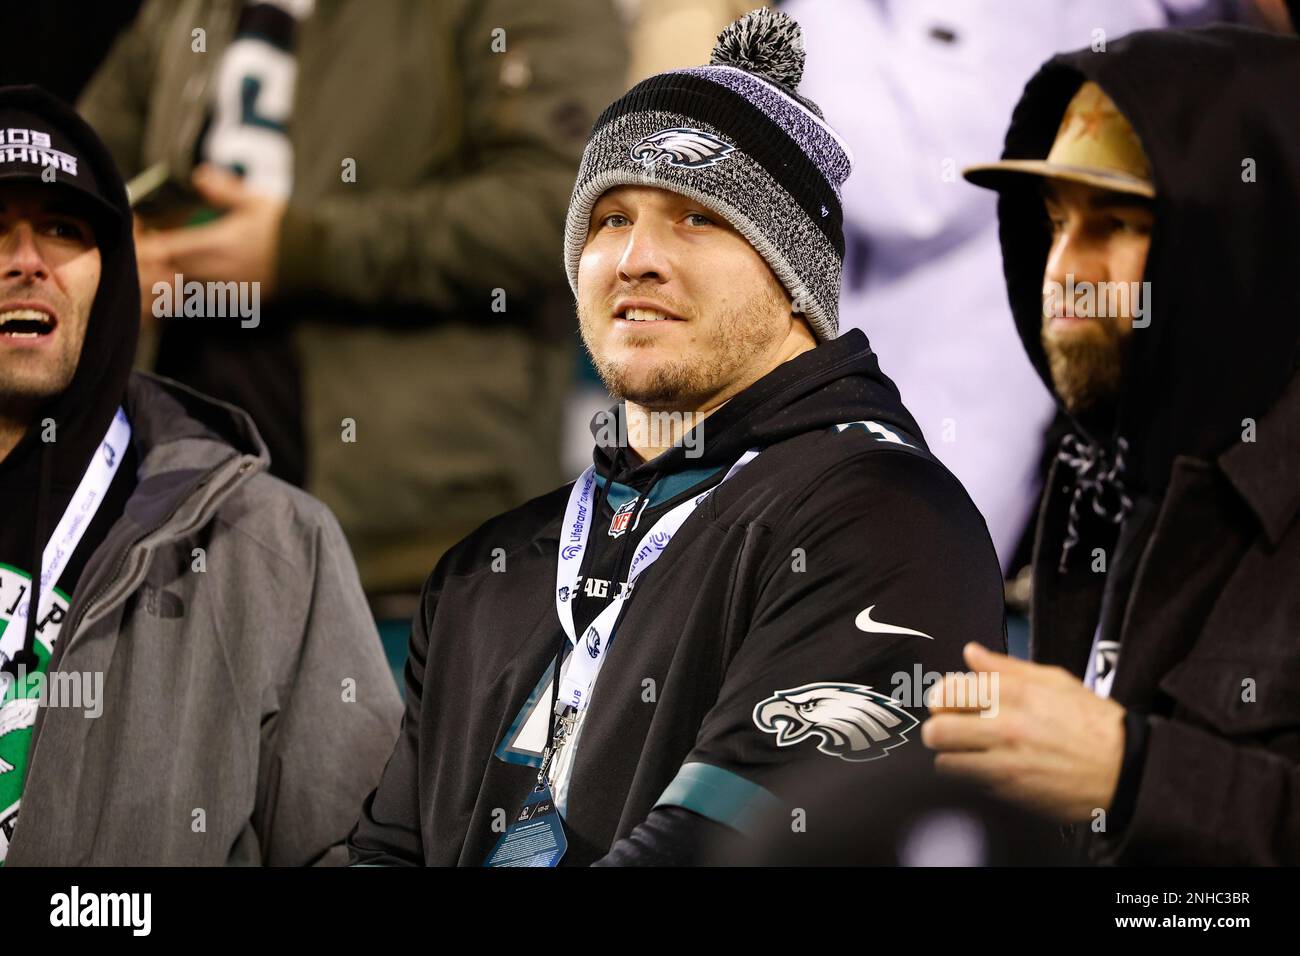 PHILADELPHIA, PA - JANUARY 21: Major League Baseball player Mike Trout  prior to the NFC Divisional playoff game between the Philadelphia Eagles  and the New York Giants on January 21, 2023 at